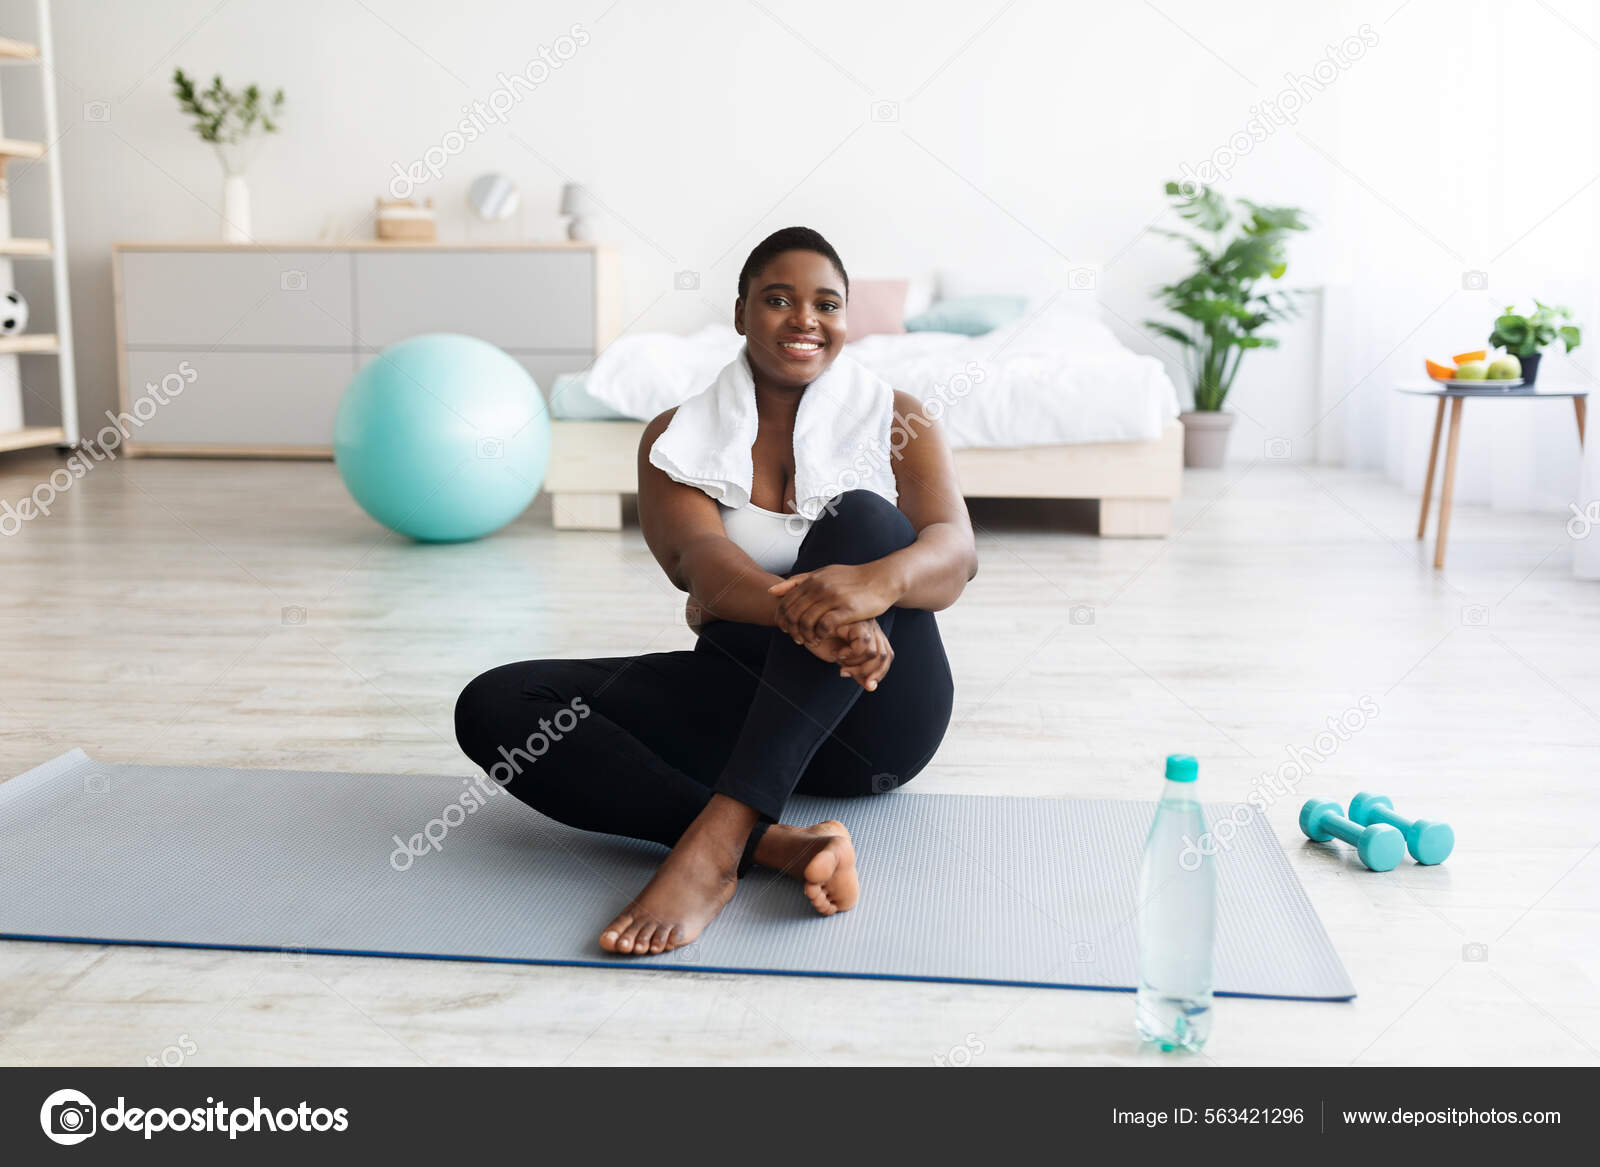 Smiling overweight young black woman sitting on yoga mat, resting